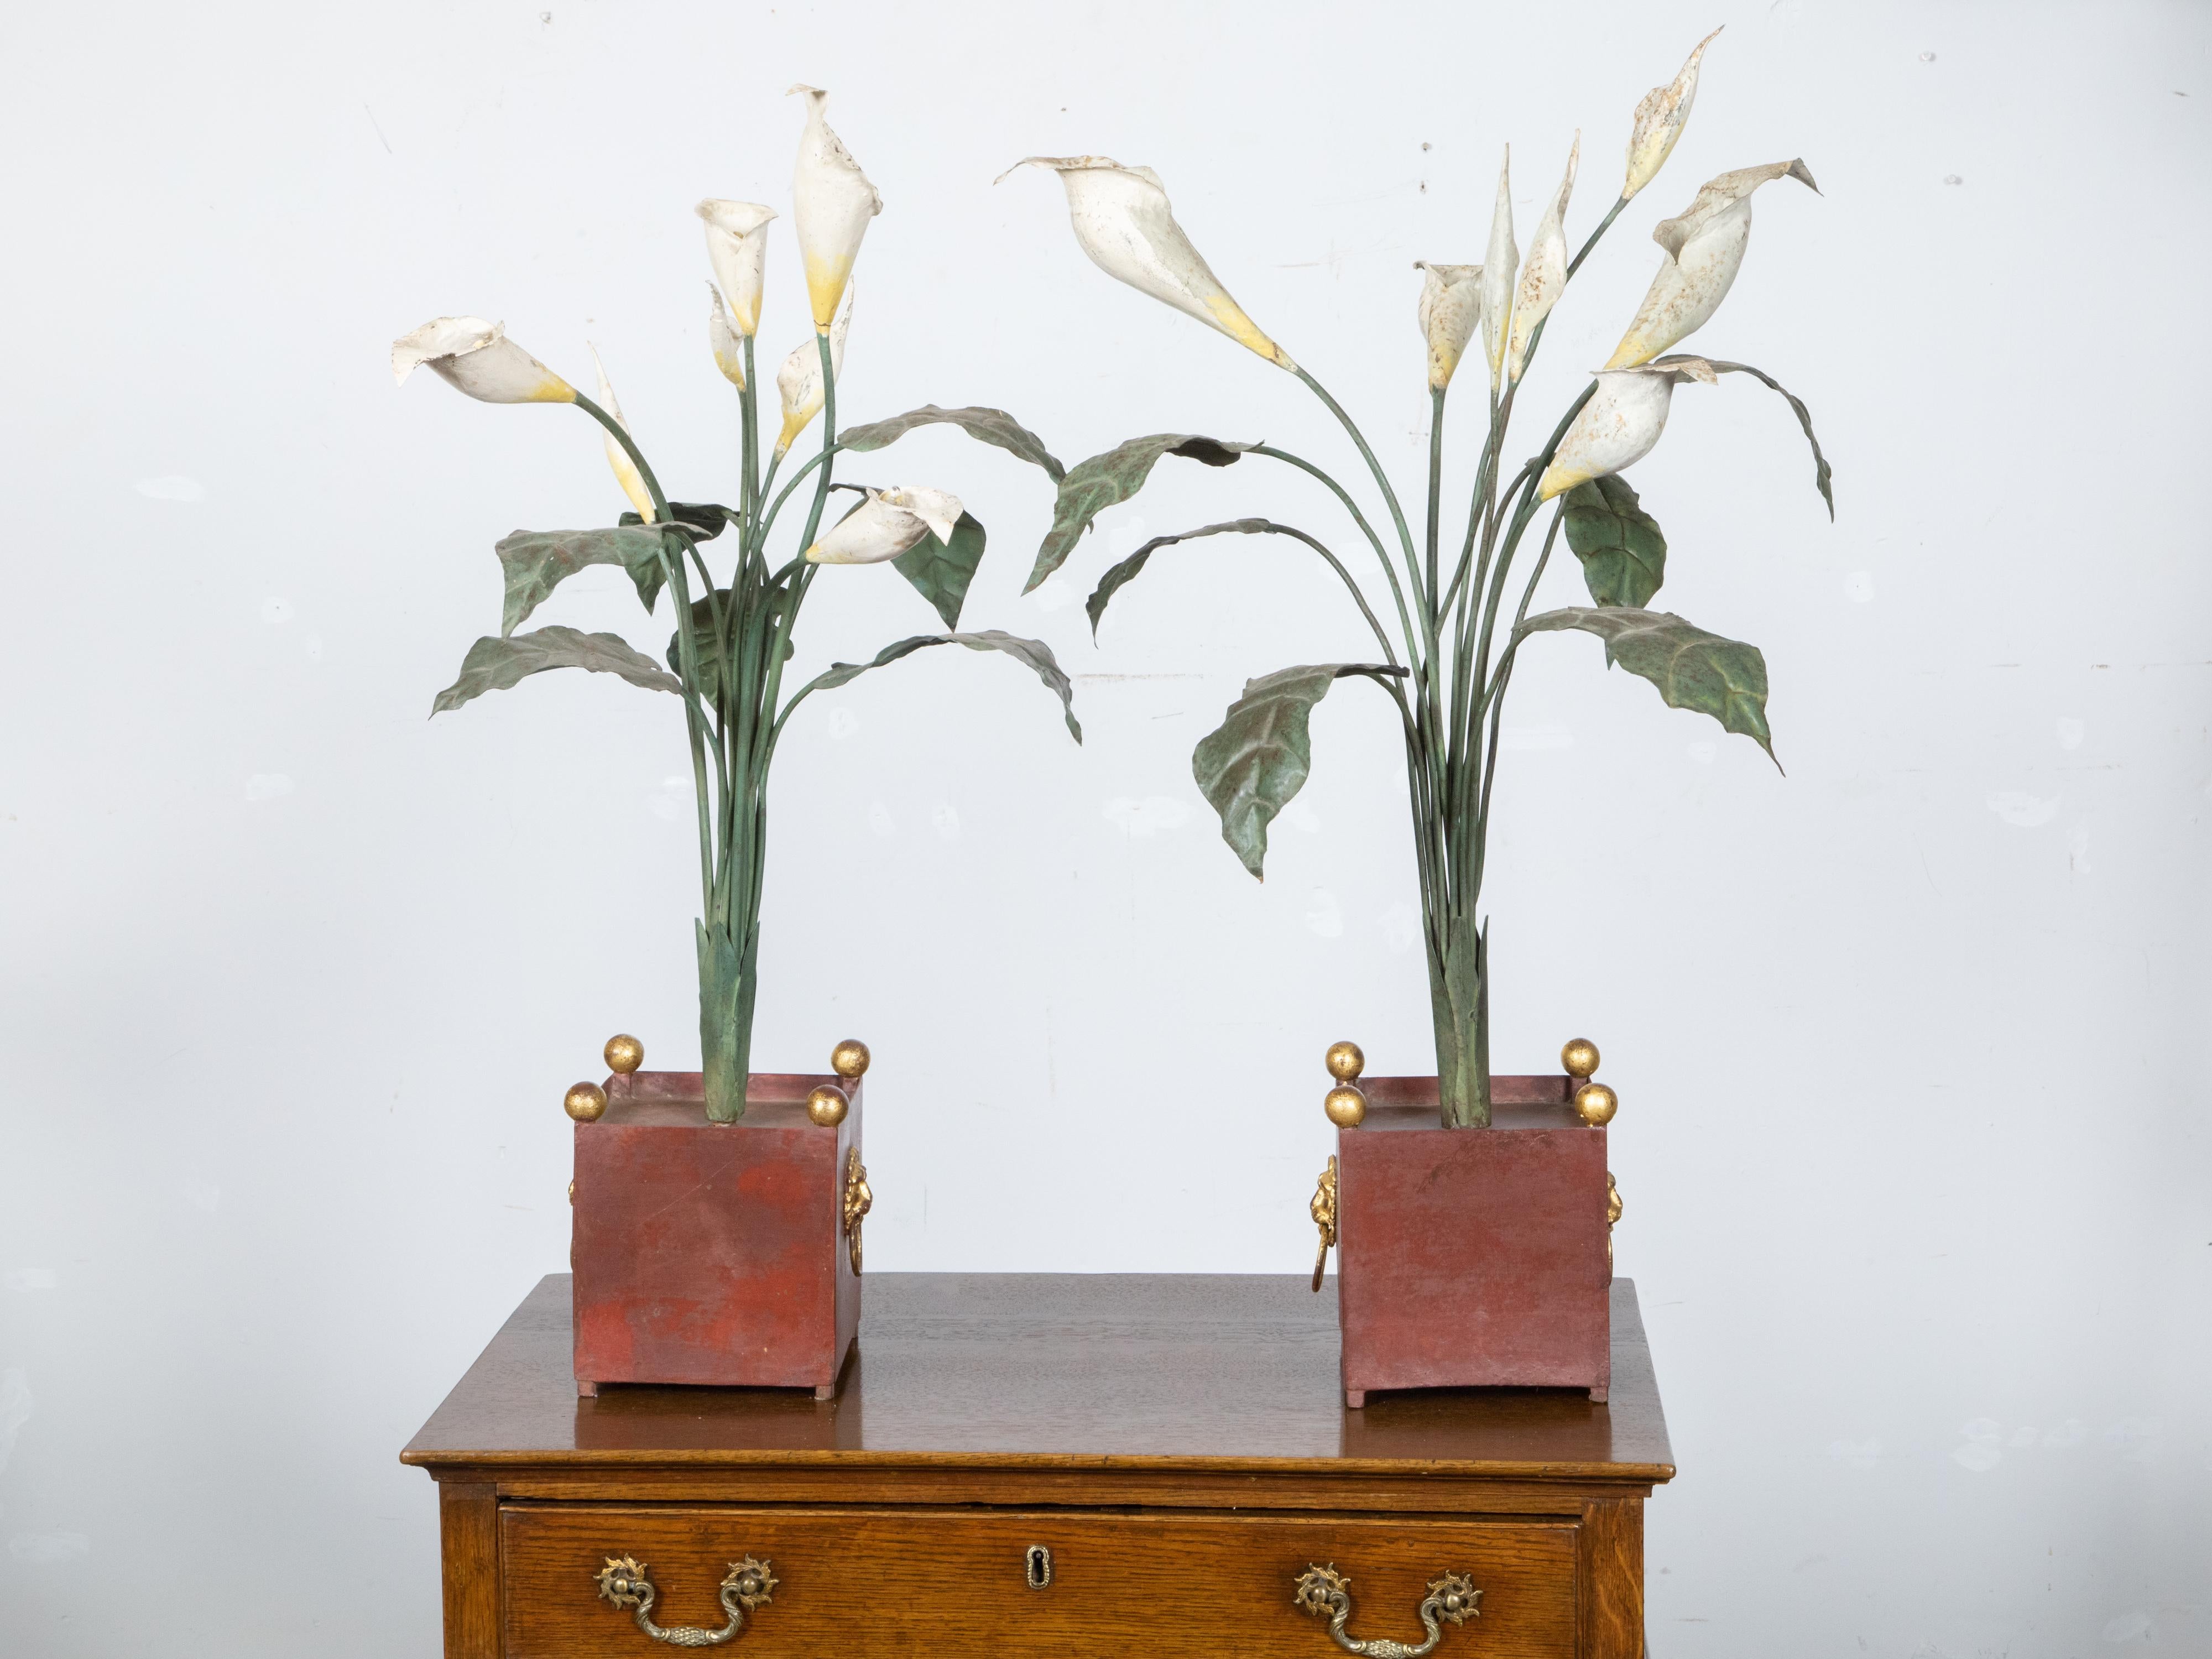 Pair of Italian 1930s Tôle Calla Lillies Sculptures in Red and Gold Containers For Sale 2